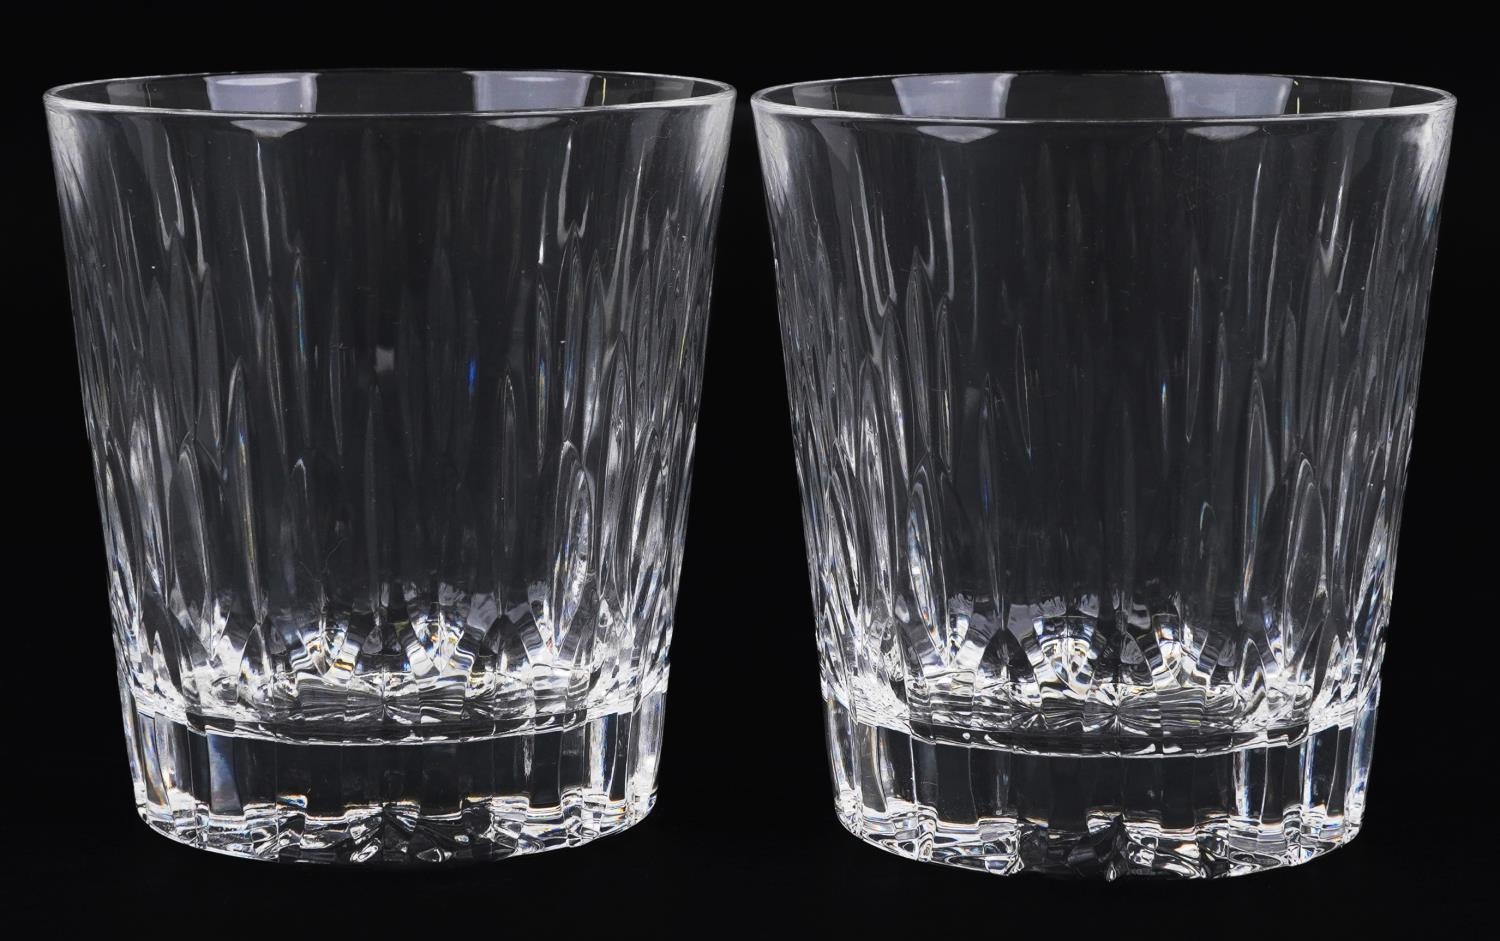 Pair of Harrods crystal glasses housed in a fitted box, each glass 8cm high - Image 4 of 7